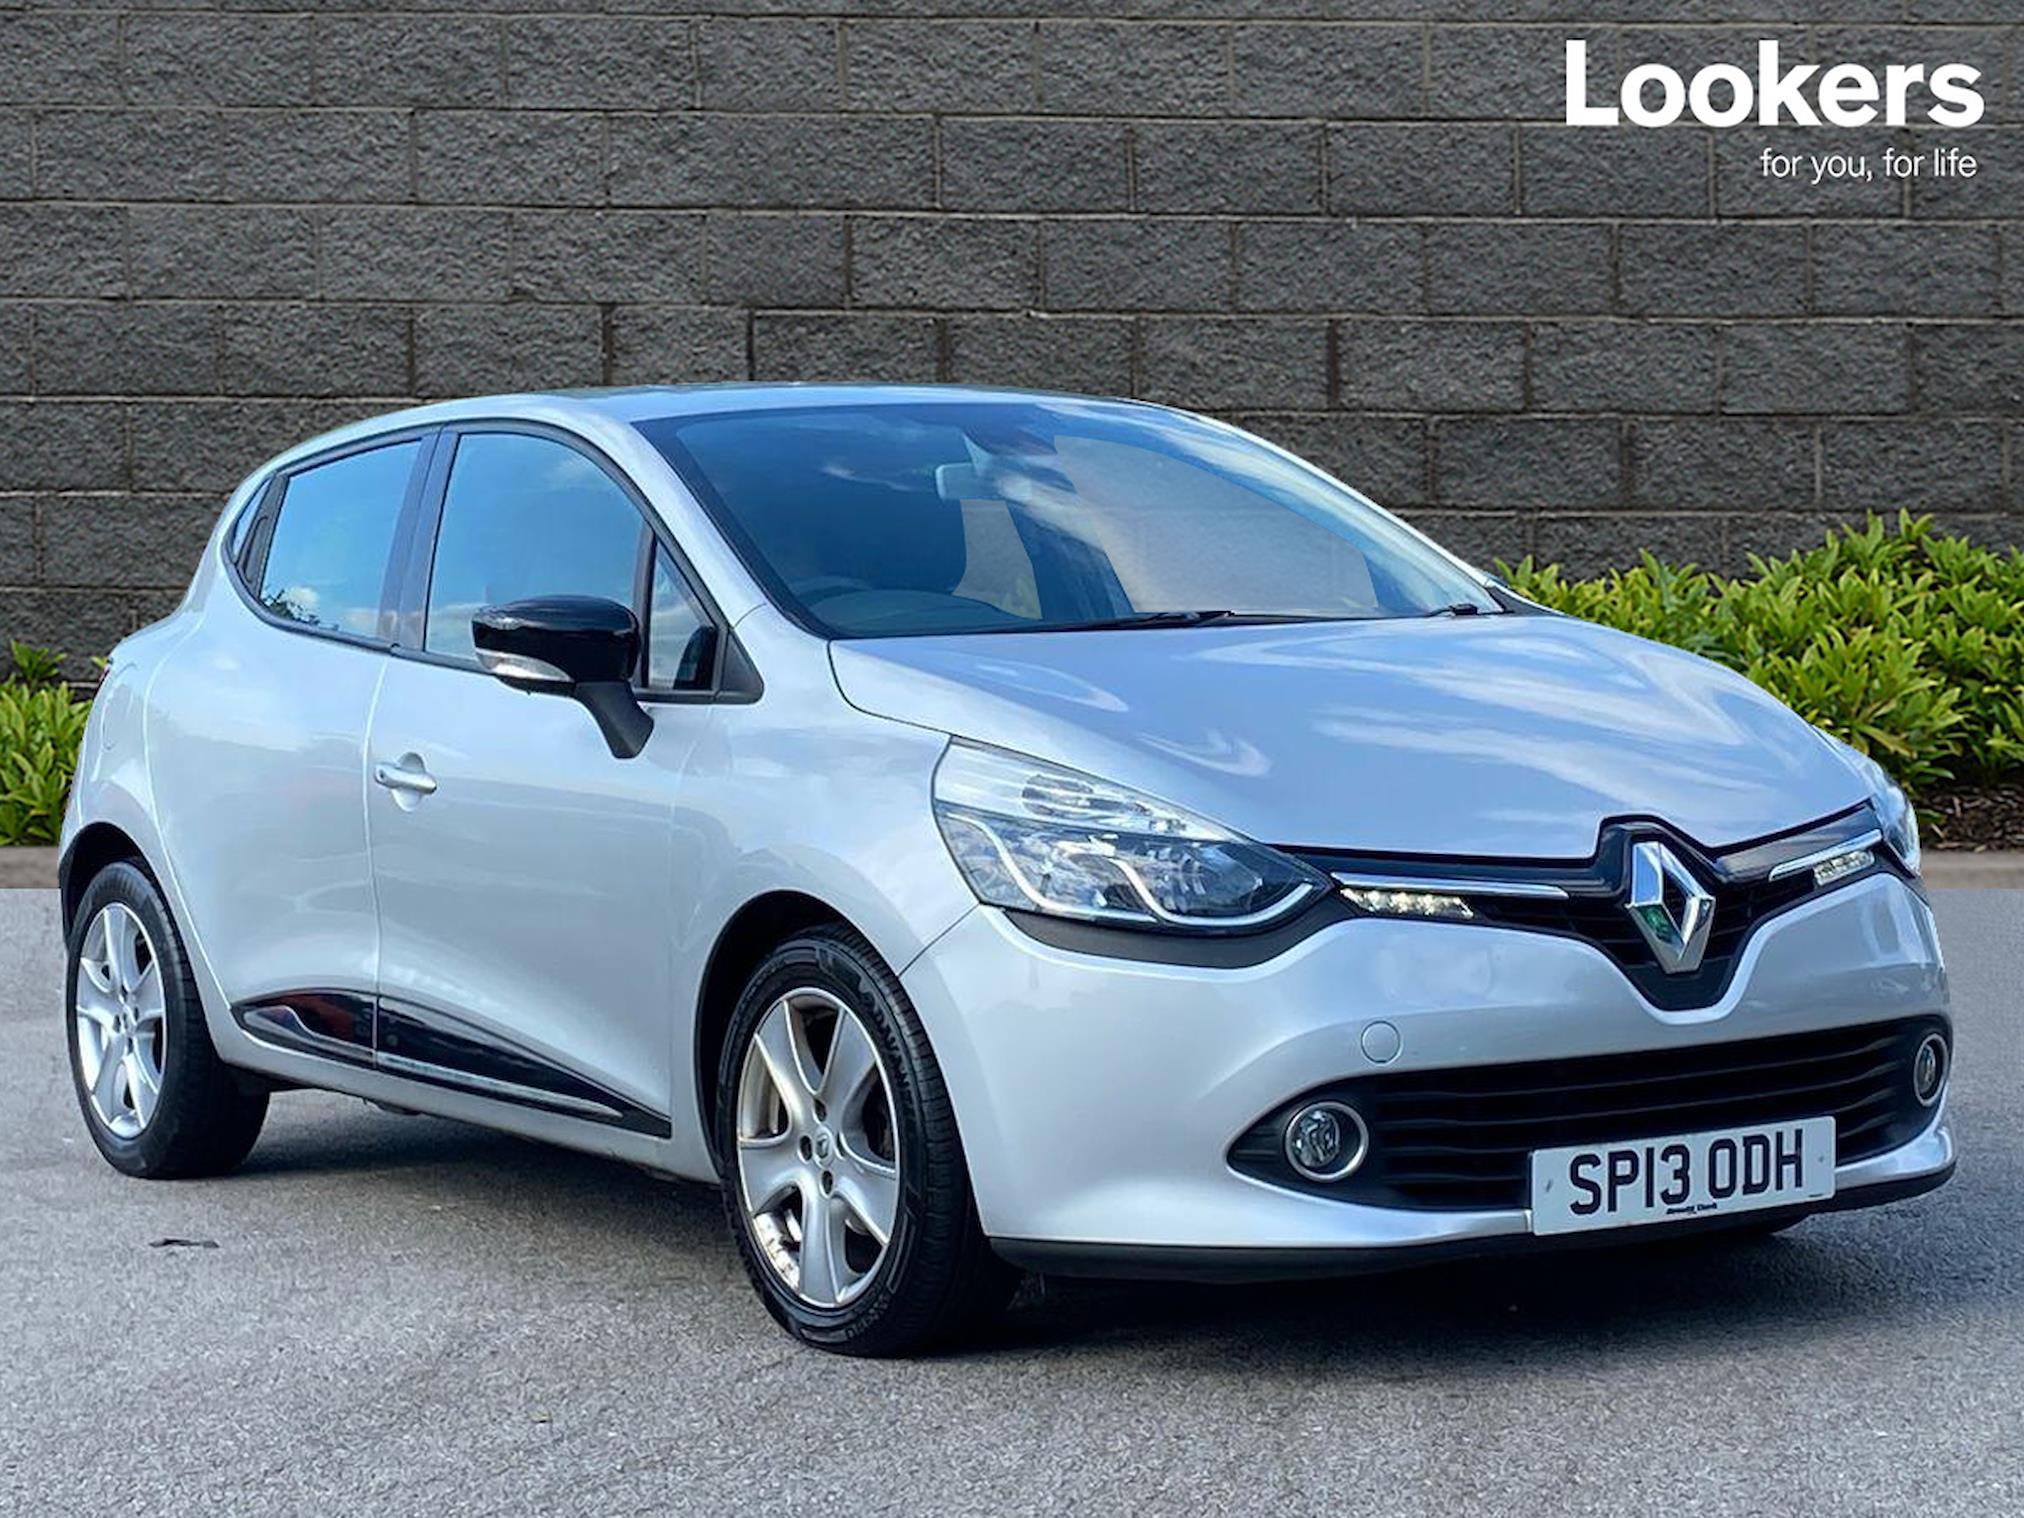 Used RENAULT CLIO 1.5 Dci 90 Eco Dynamique Medianav Energy 5Dr 2013